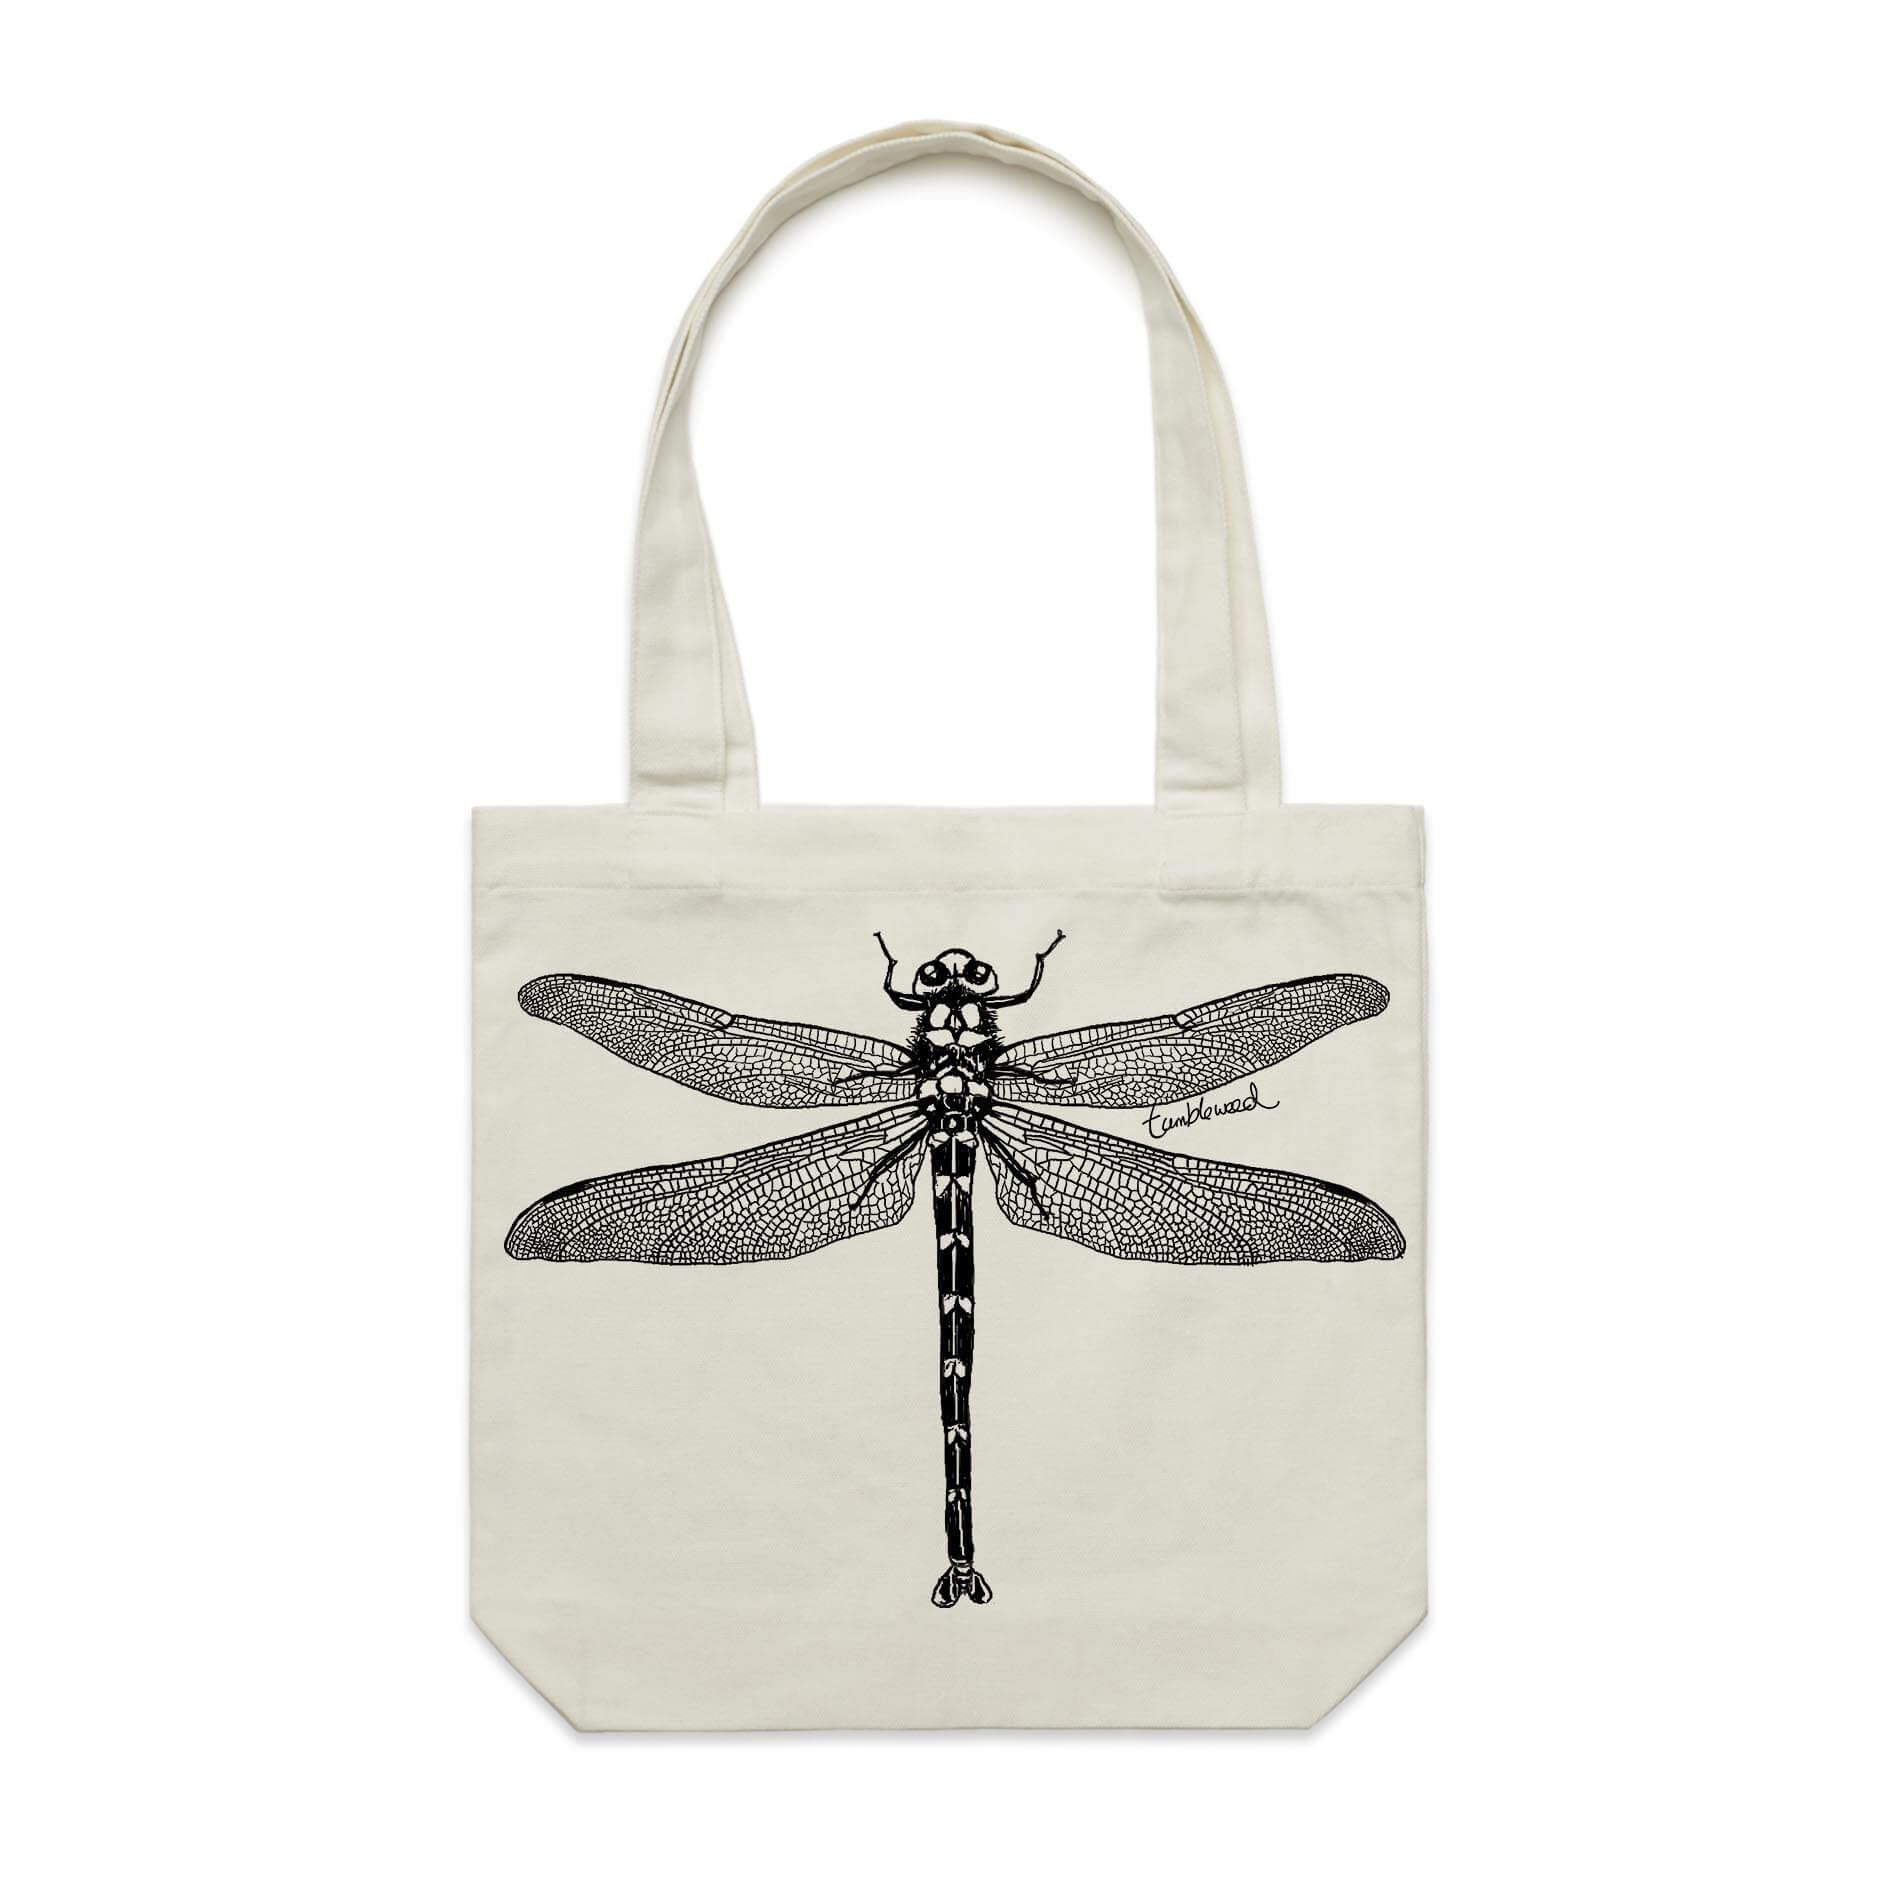 Cotton canvas tote bag with a screen printed Dragonfly design.